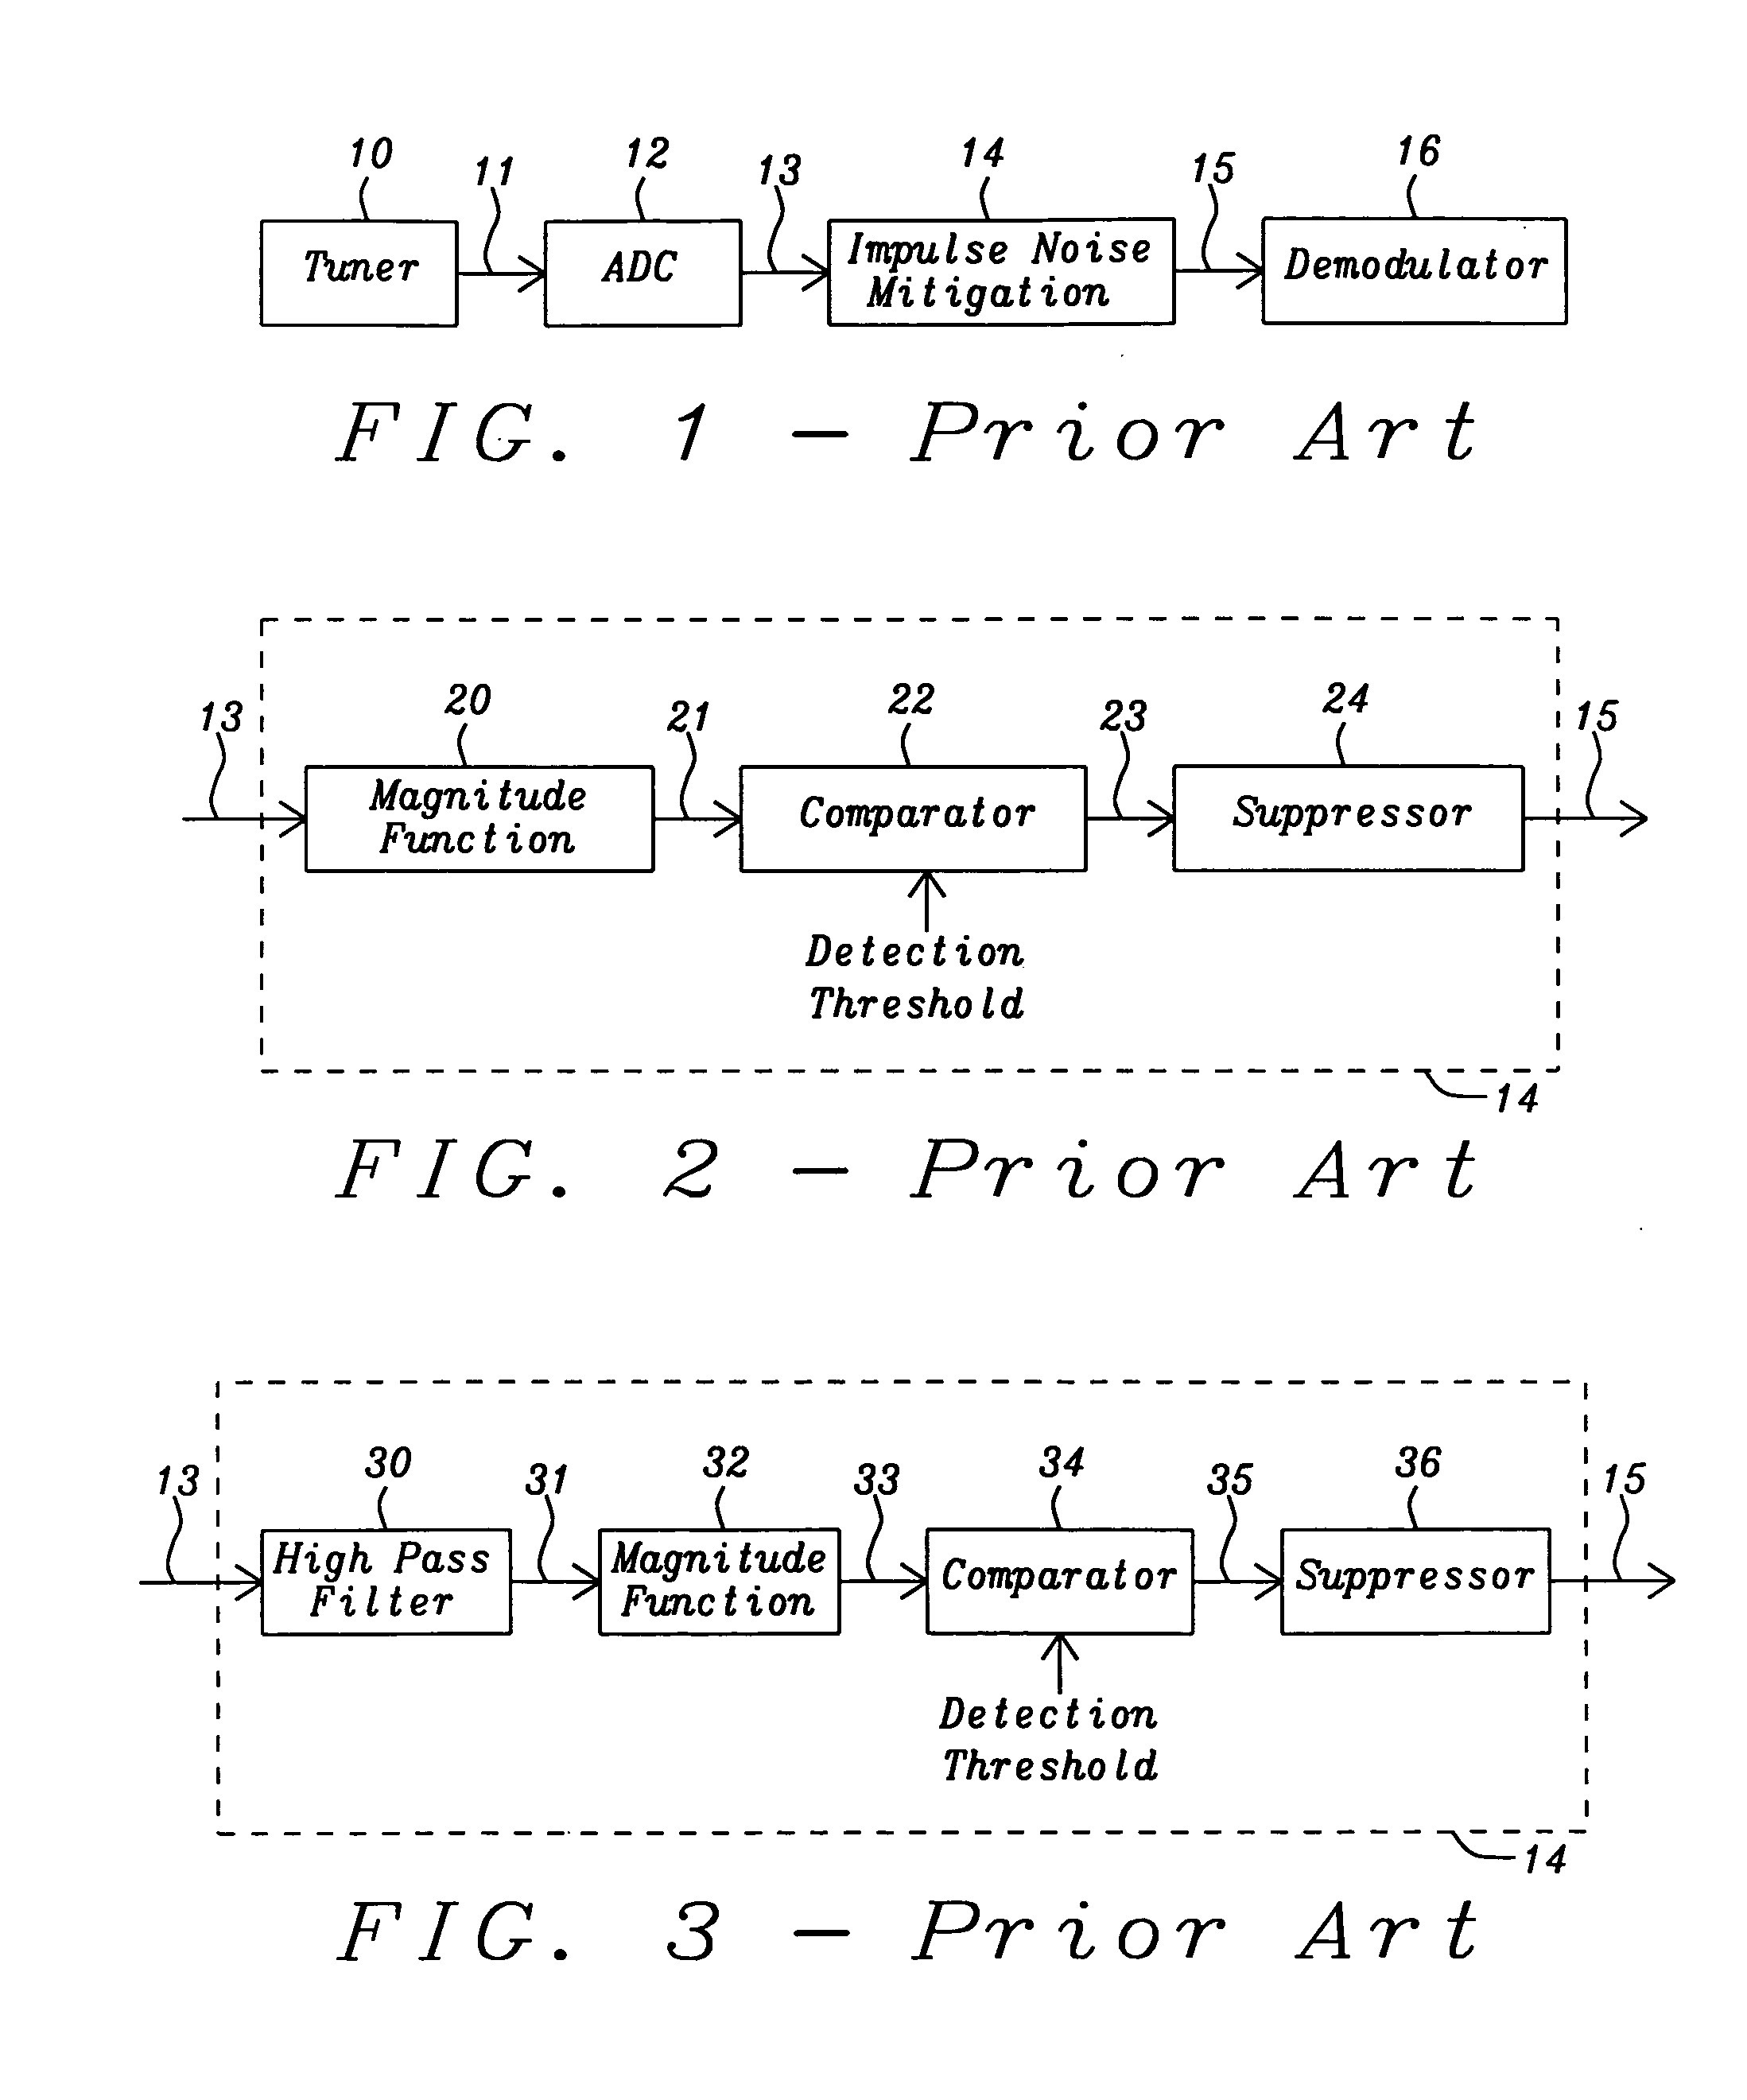 Impulse noise mitigation under out-of-band interference conditions